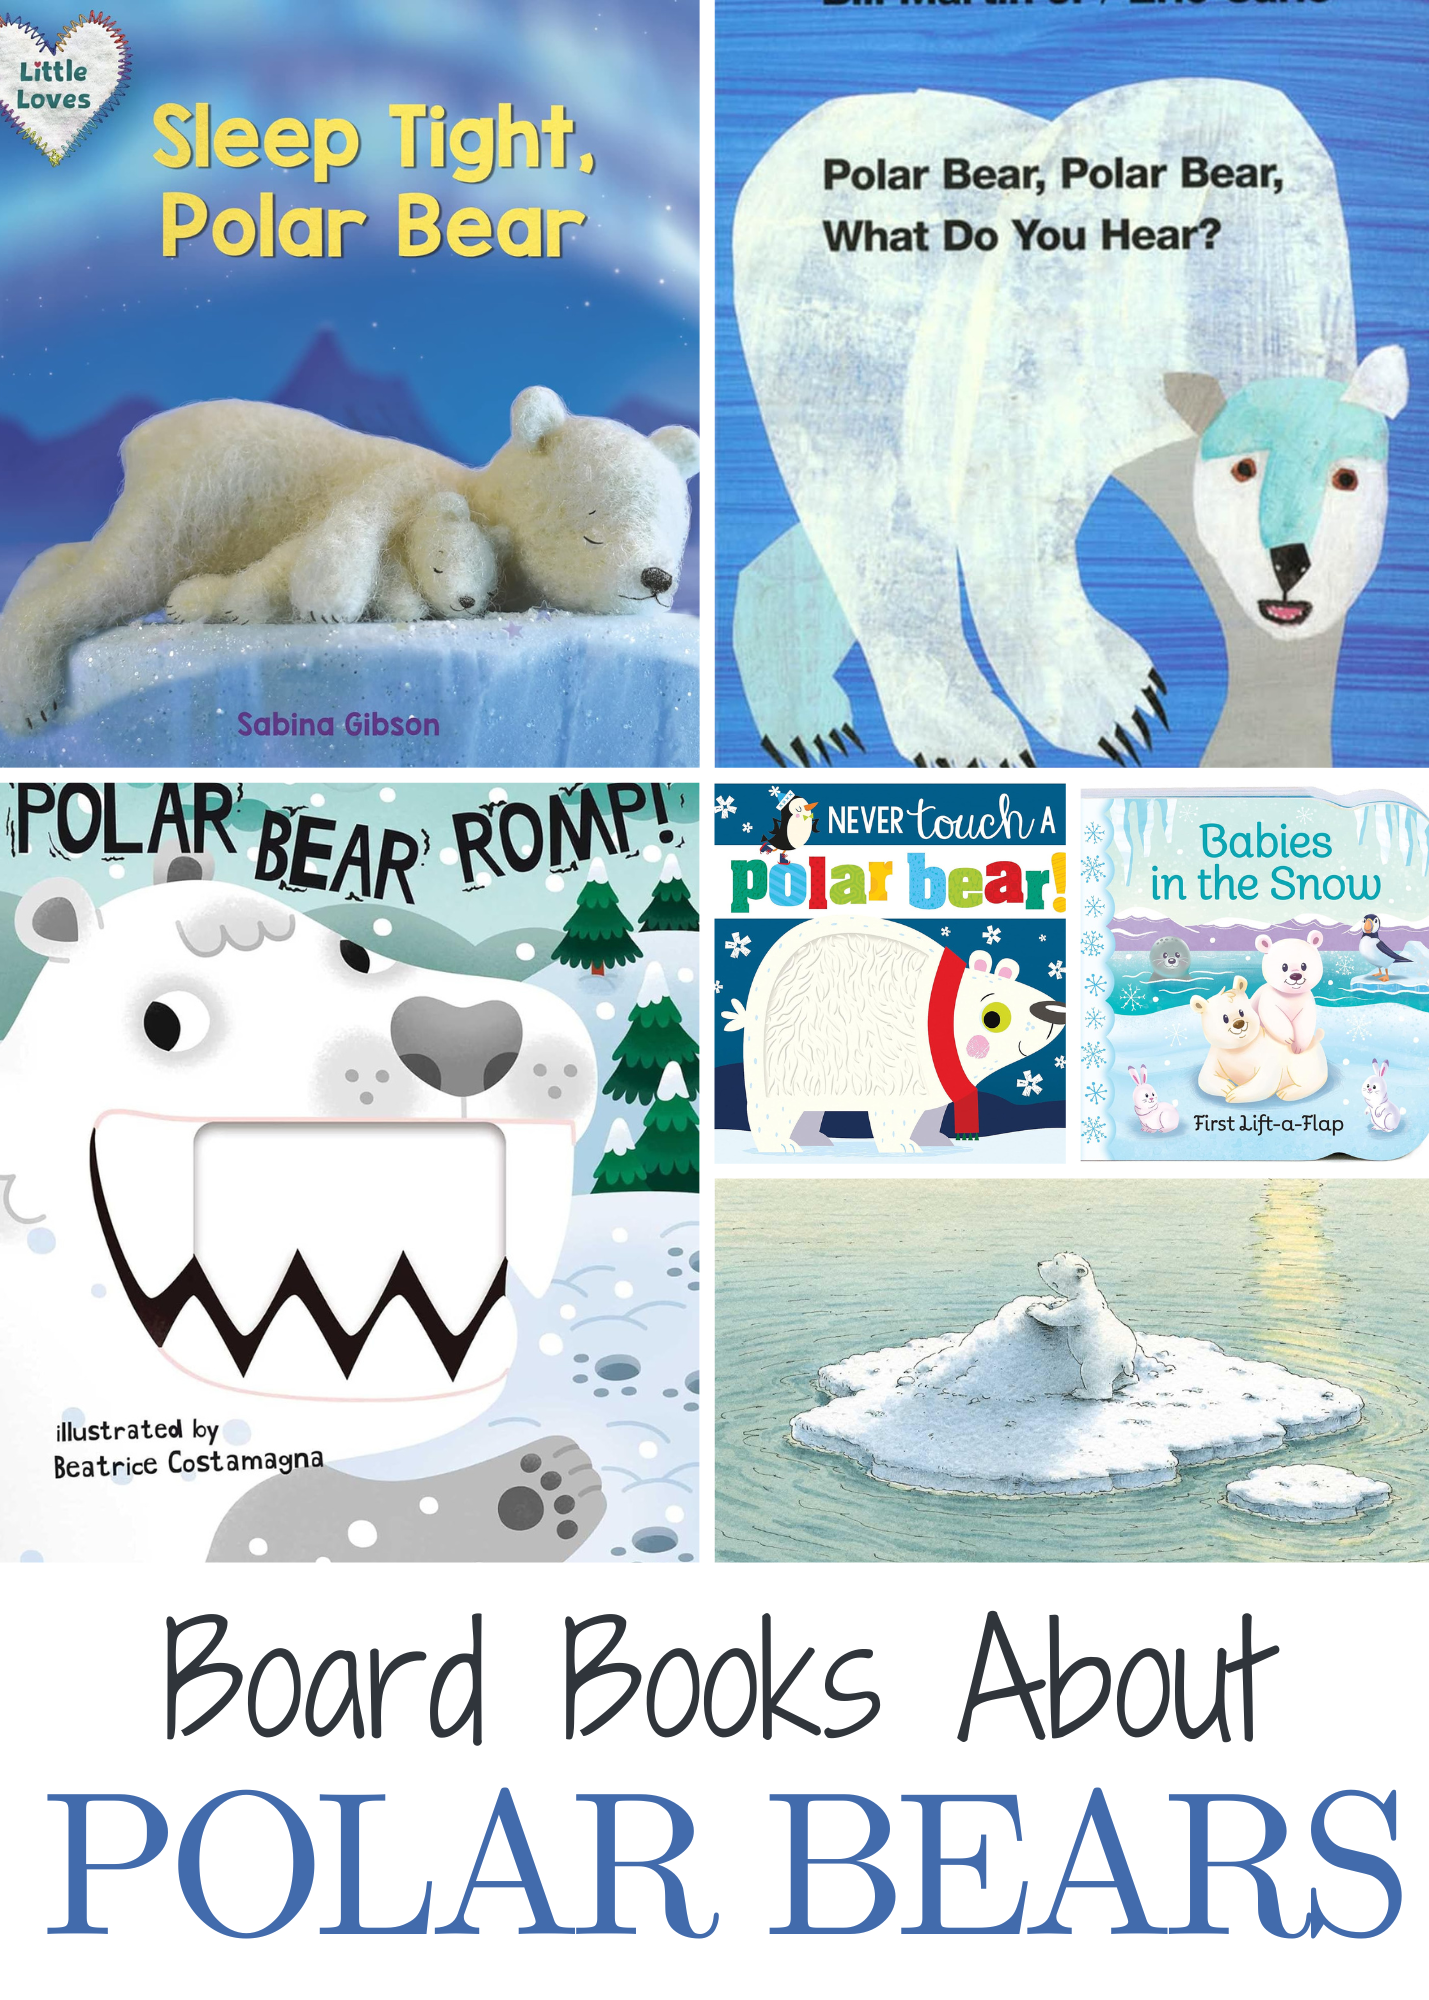 childrens-books-about-polar-bears-1 Polar Bear Books for Toddlers